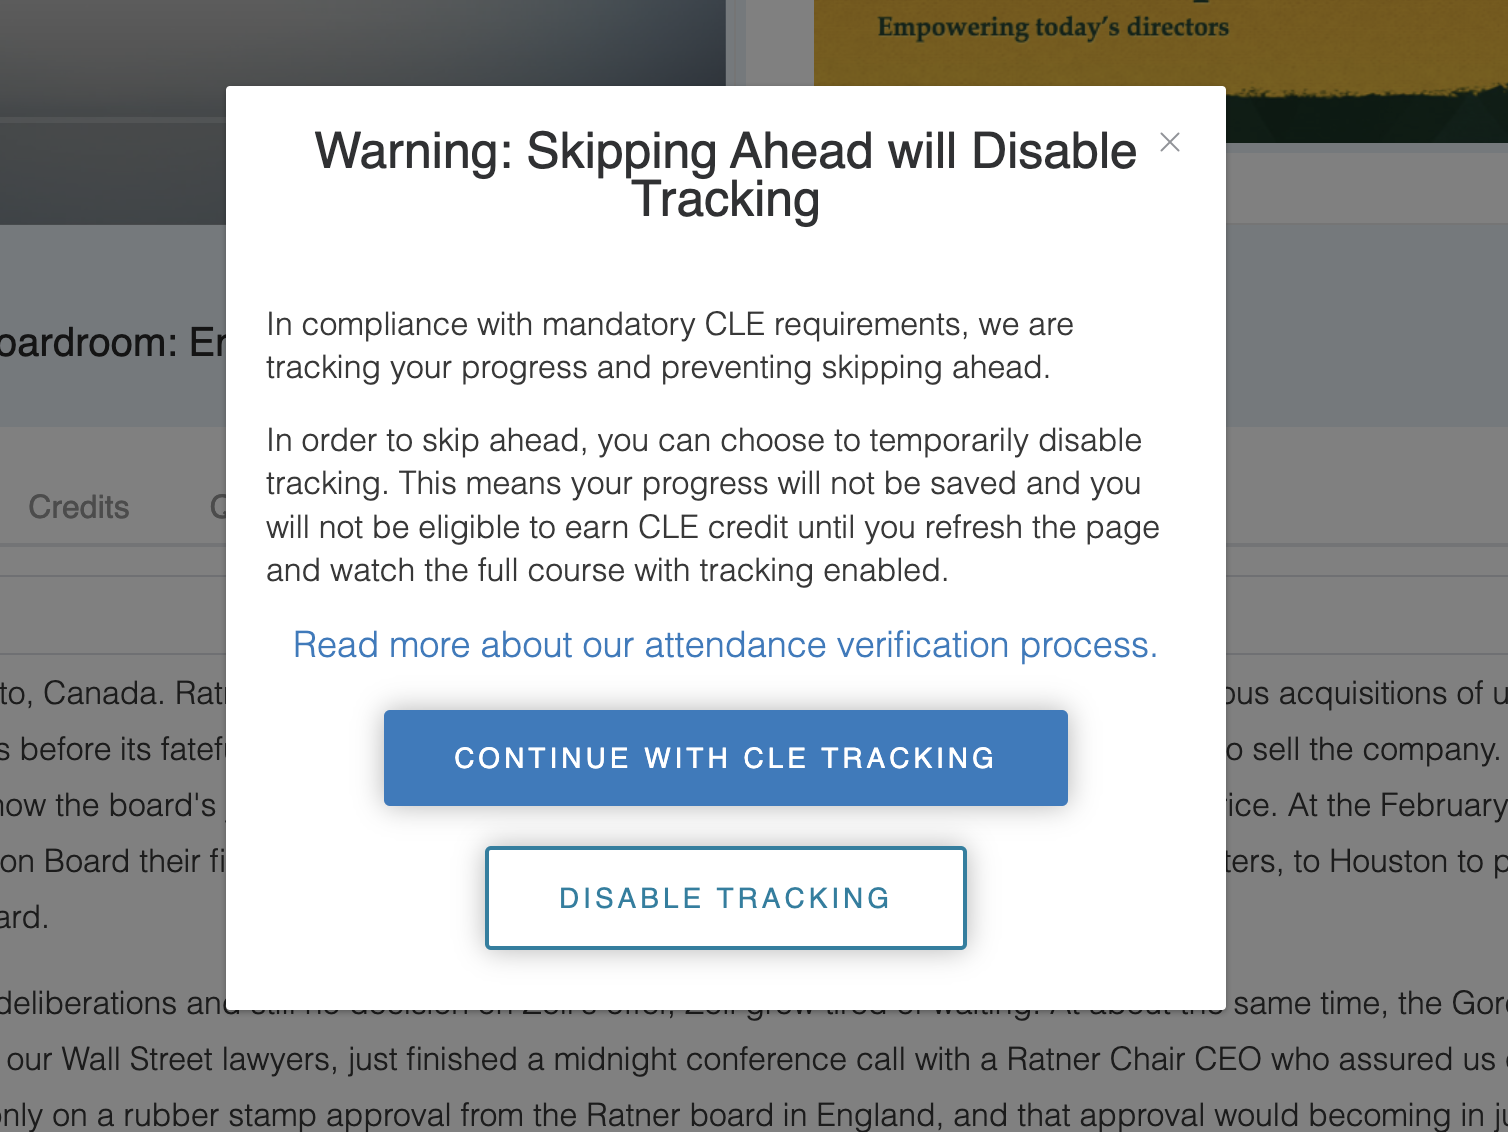 Warning pop-up that explains if choosing to skip ahead in the course, Lawline’s tracking will be disabled and the option to receive a certificate at the end of the program will be unavailable. The options to confirm or deny are directly below this warning.